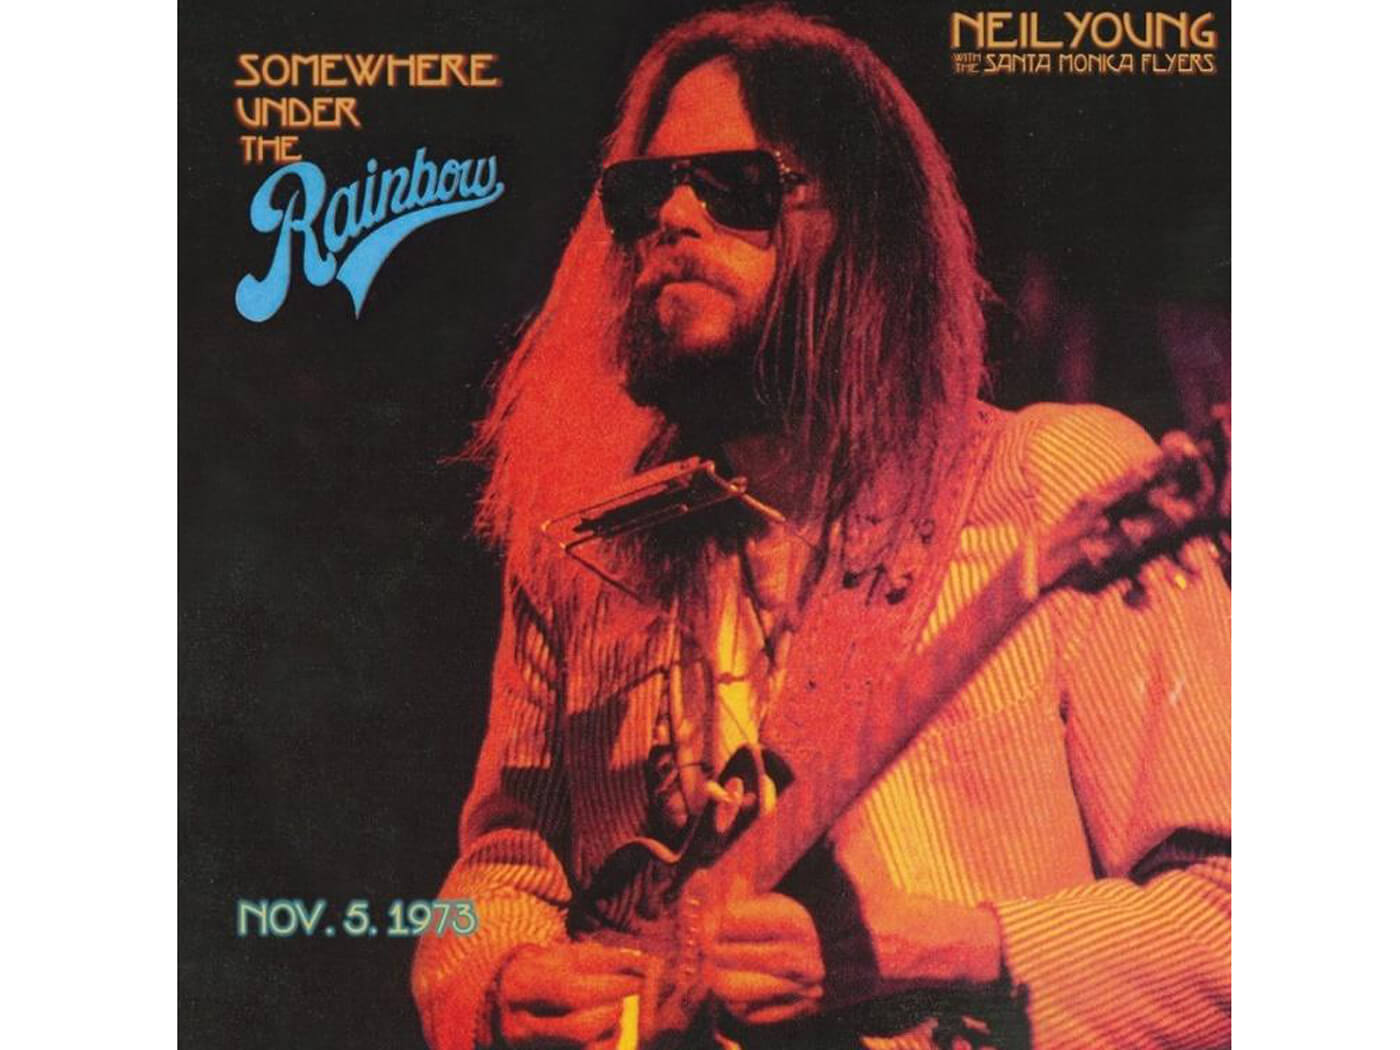 Consulaat spoelen meubilair Neil Young confirms the next two albums in his Official Bootleg Series |  UNCUT